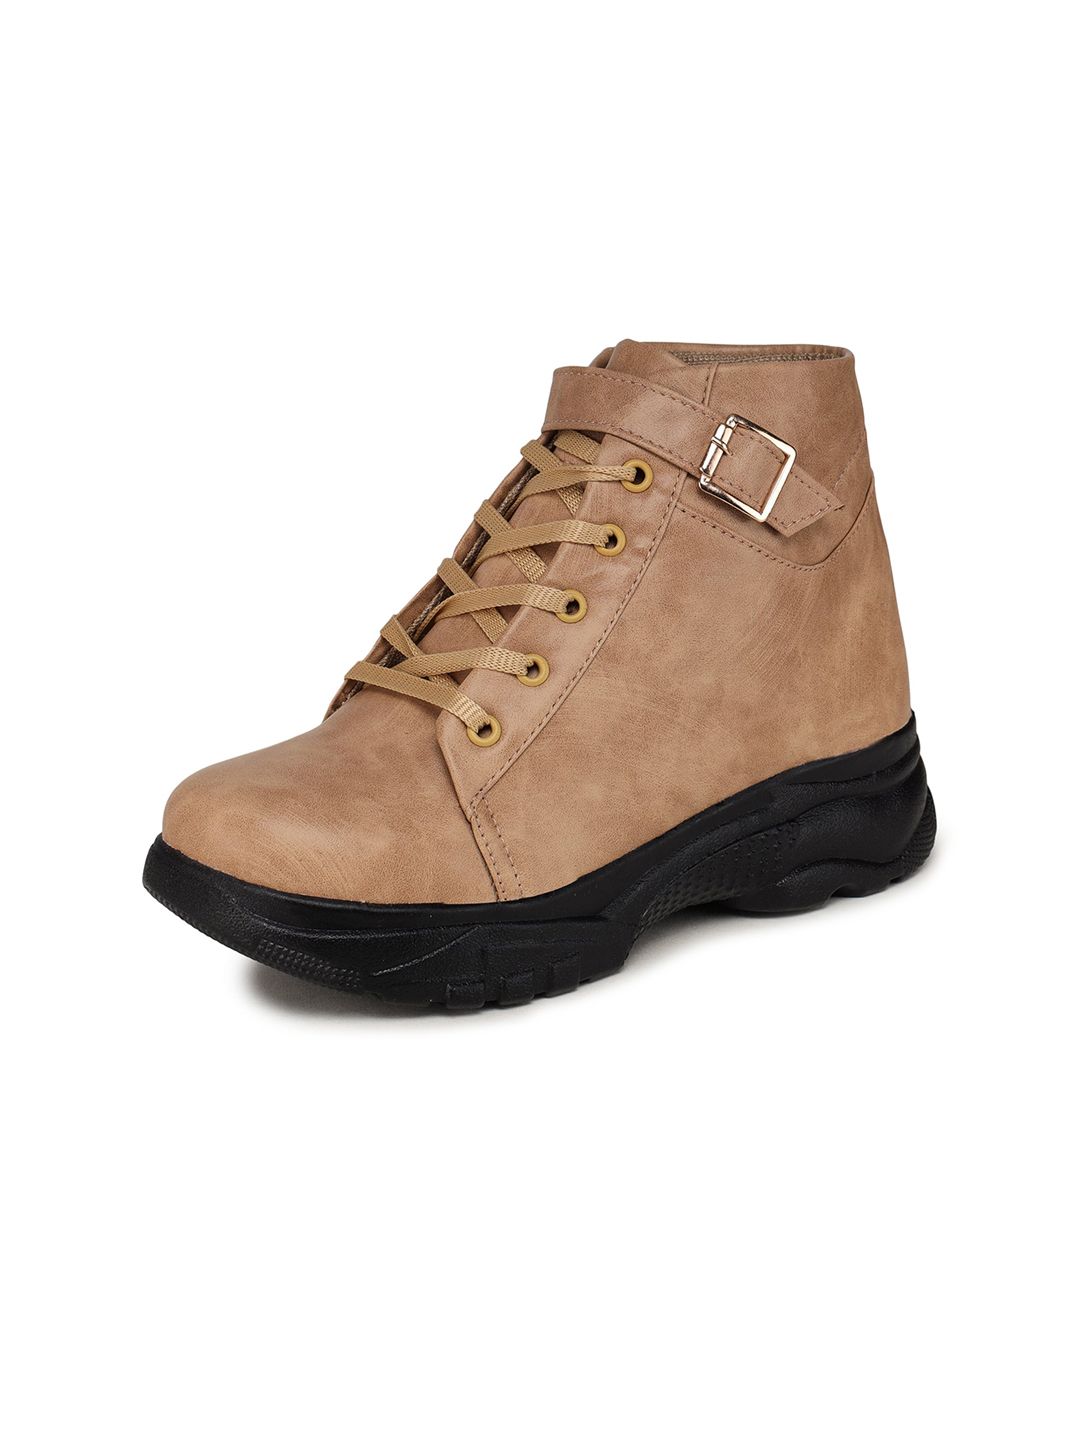 BOOTCO Women Beige Solid Casual Regular Boots Price in India